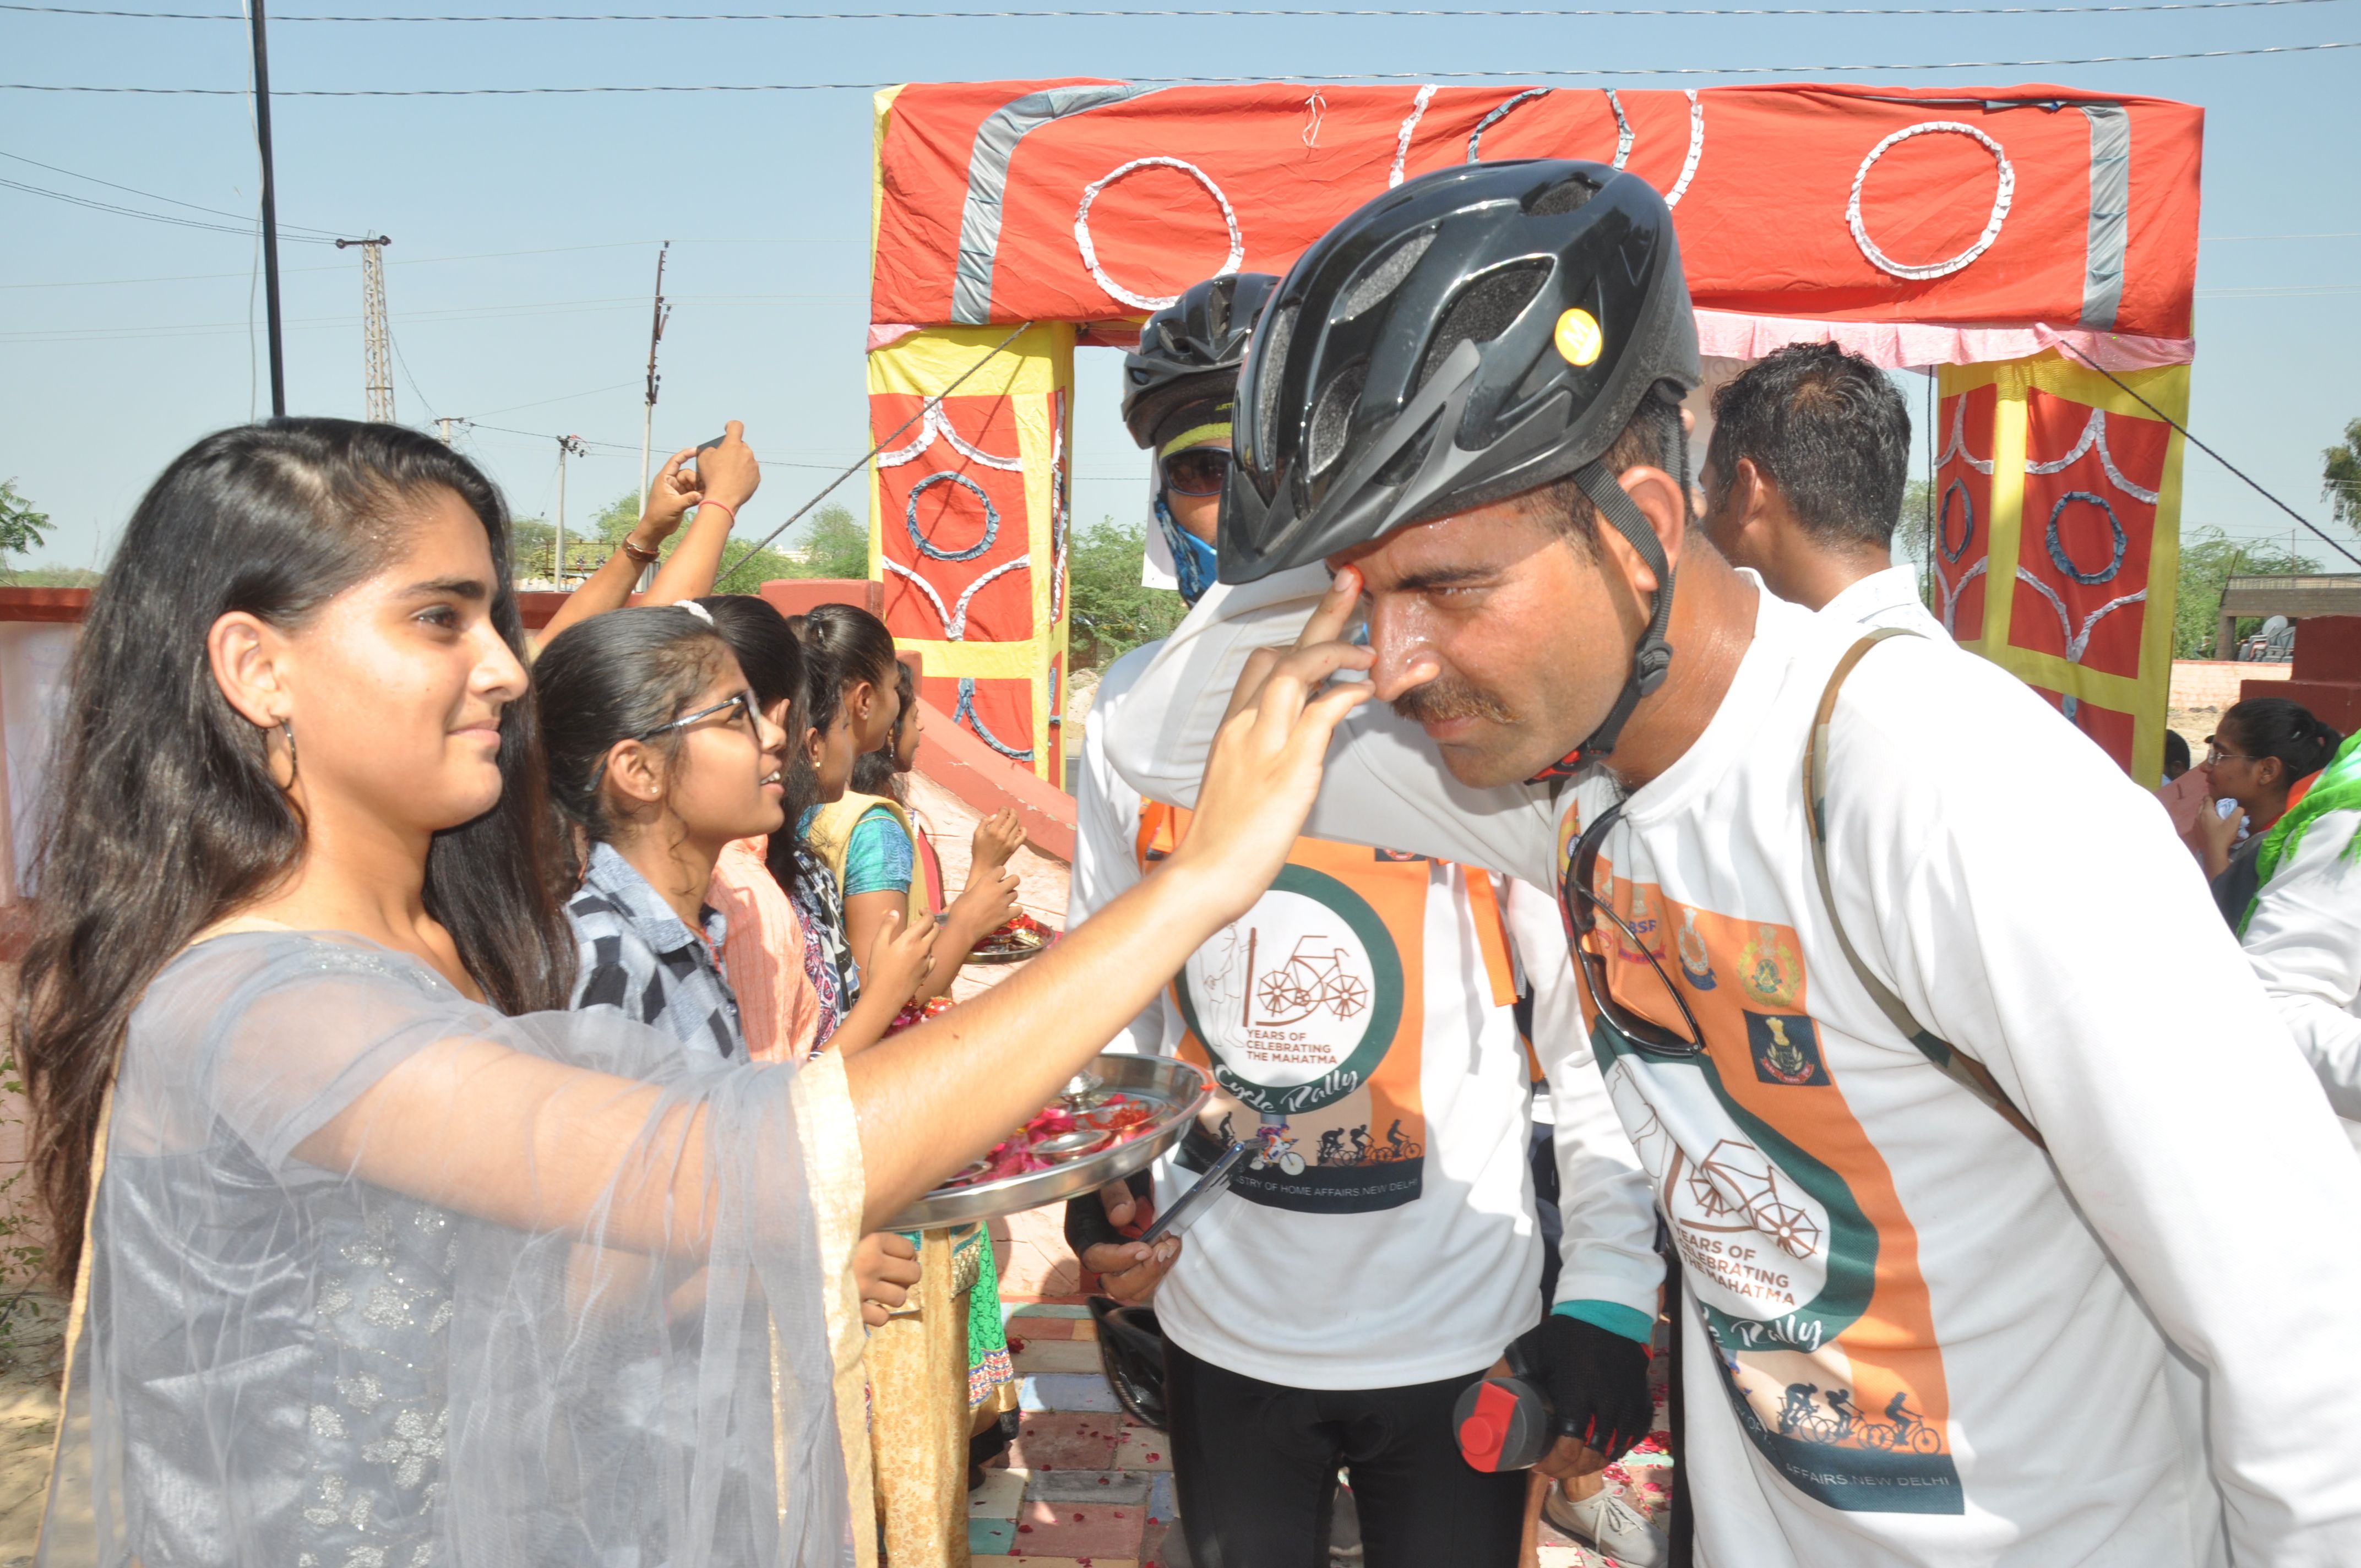 youth is thrilled by hospitality of Marwar